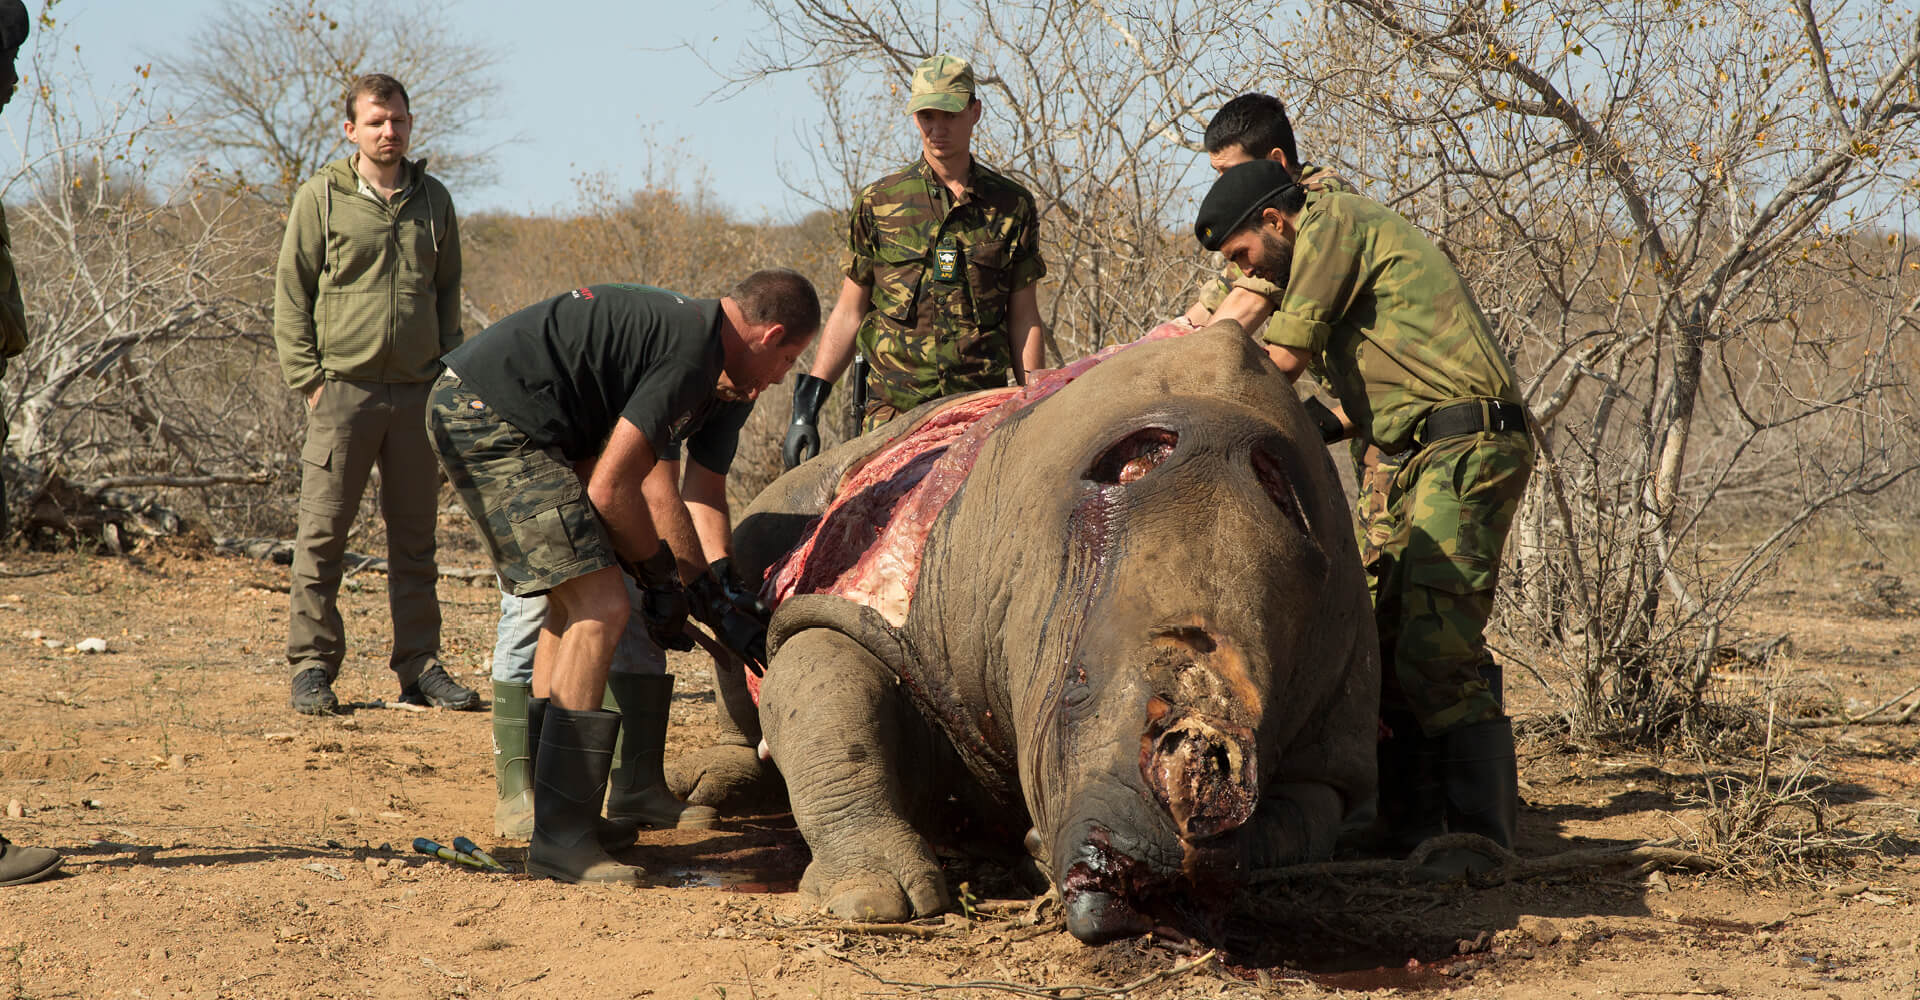 Hemmersbach Rhino Force - Autopsy of a slaughtered rhino